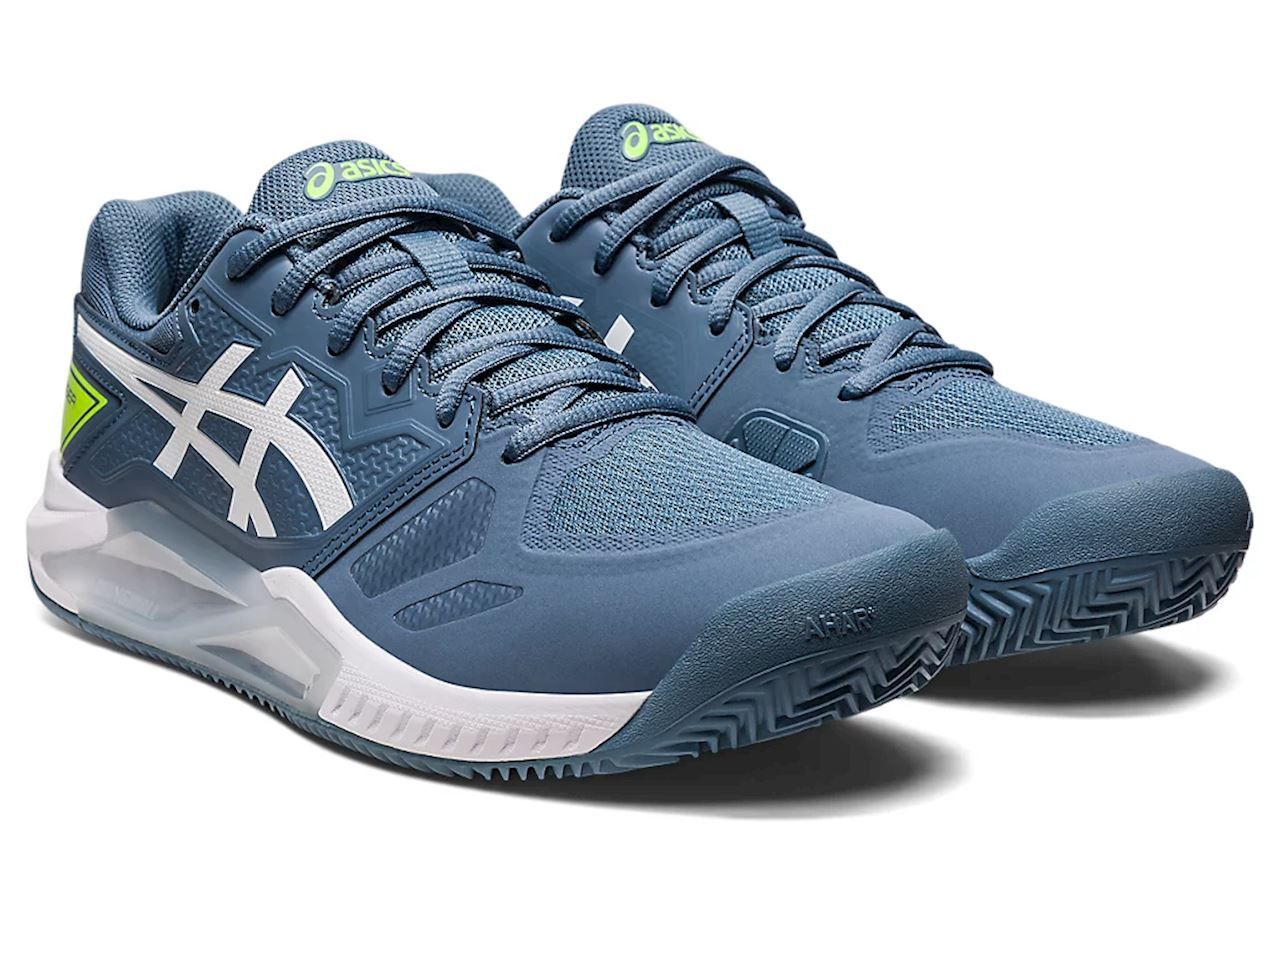 Why You Should Try the Asics GEL-Challenger Tennis Shoes 